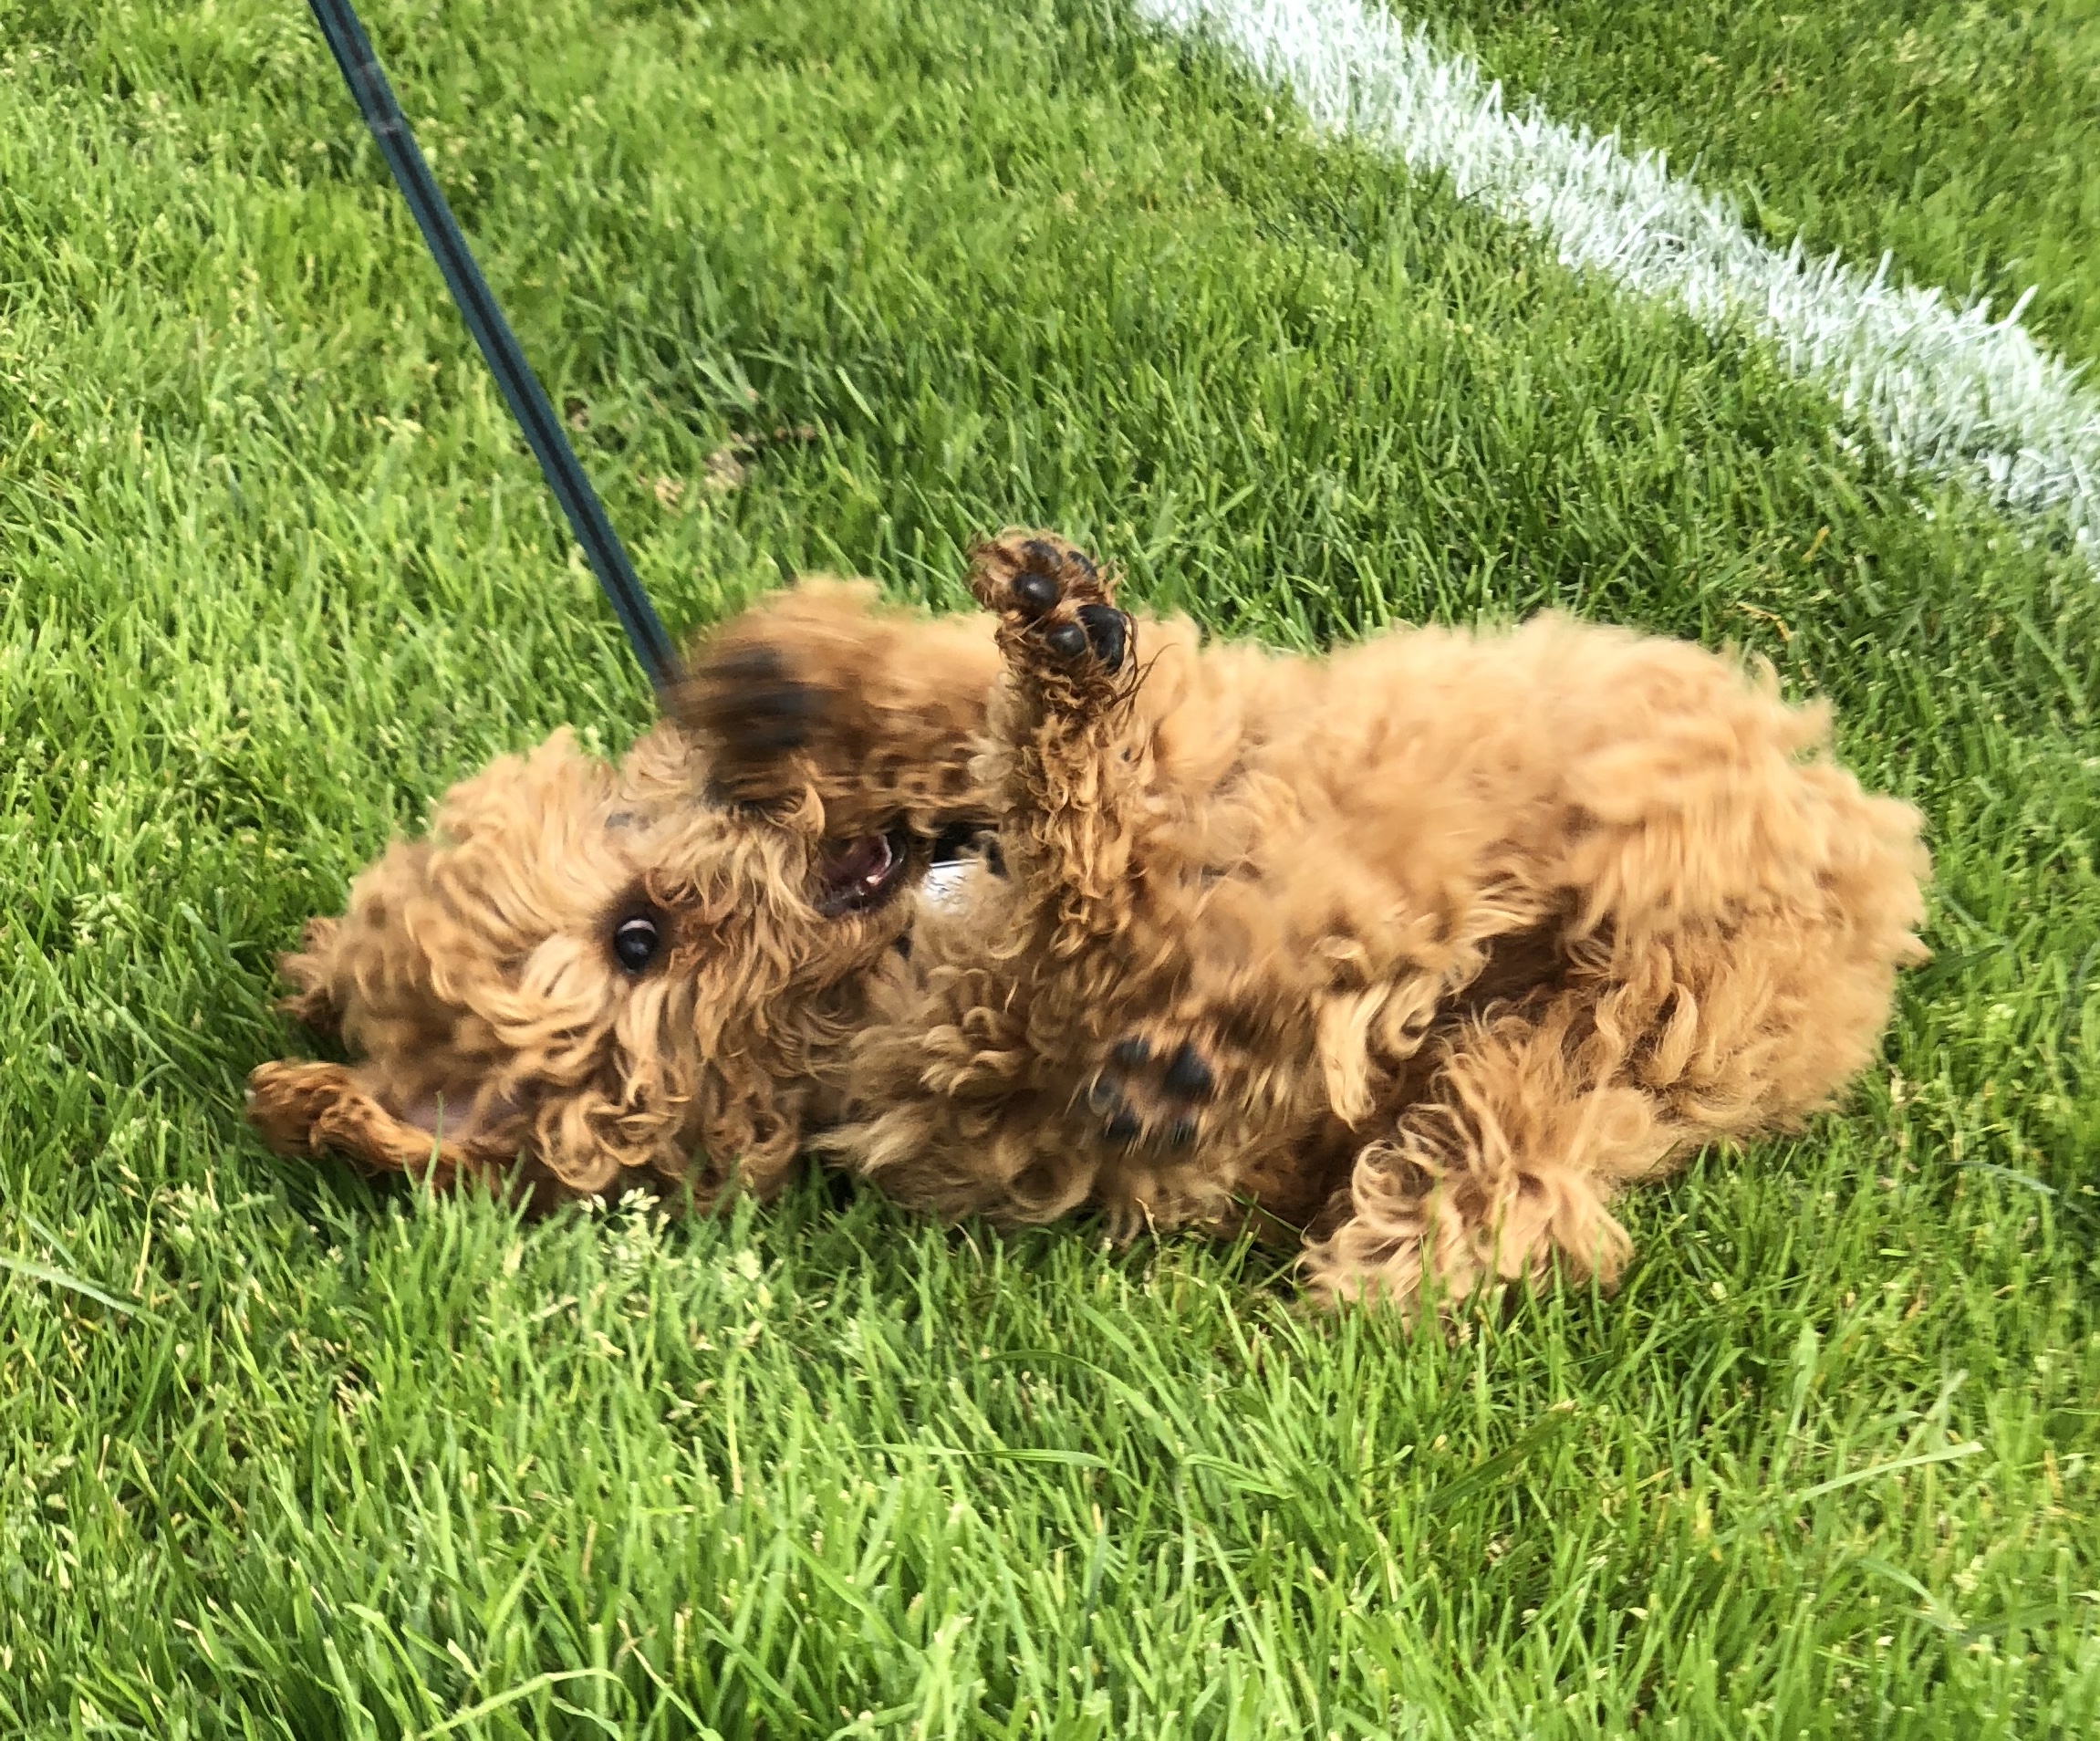 Sixteen-Week-Old Apricot Poodle Puppy Rolling In The Grass